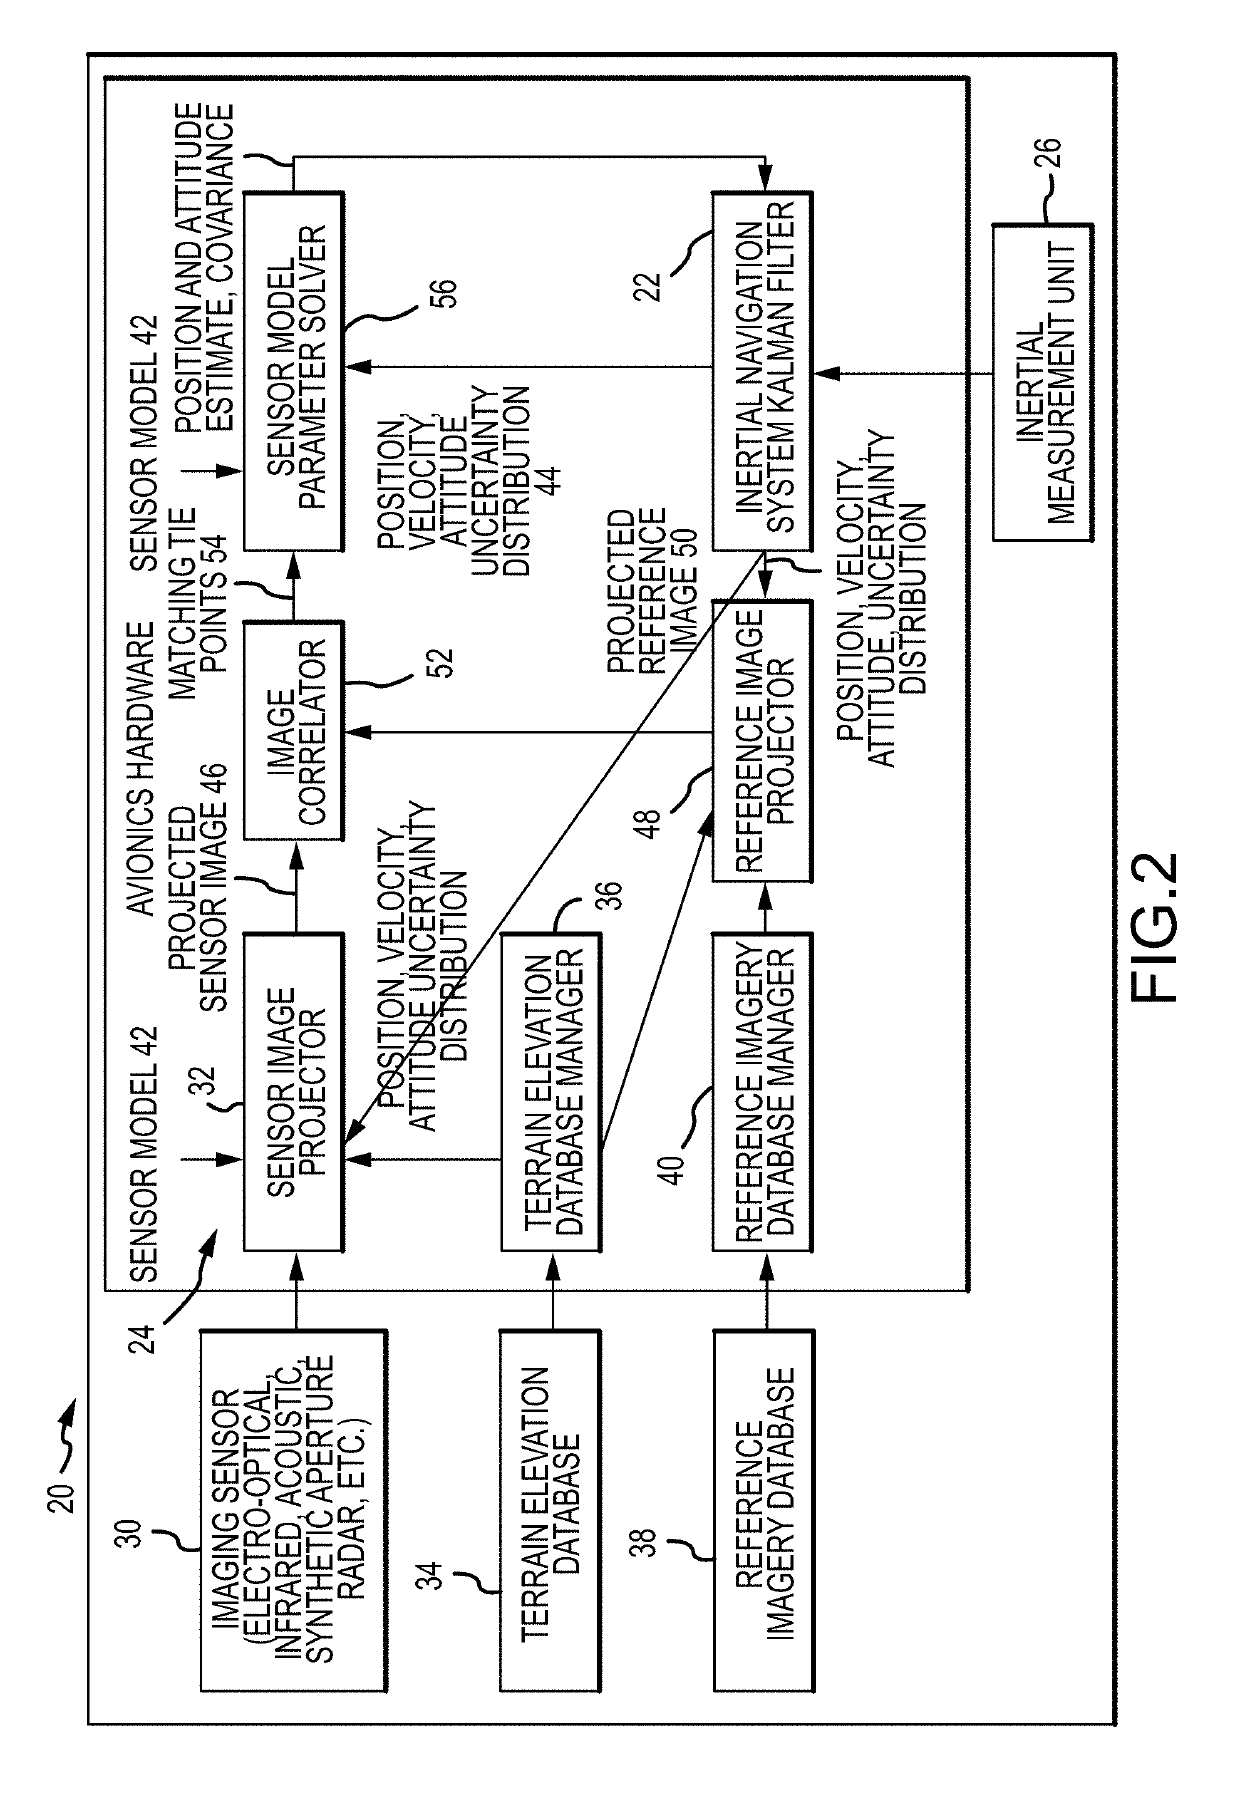 Image geo-registration for absolute navigation aiding using uncertainy information from the on-board navigation system